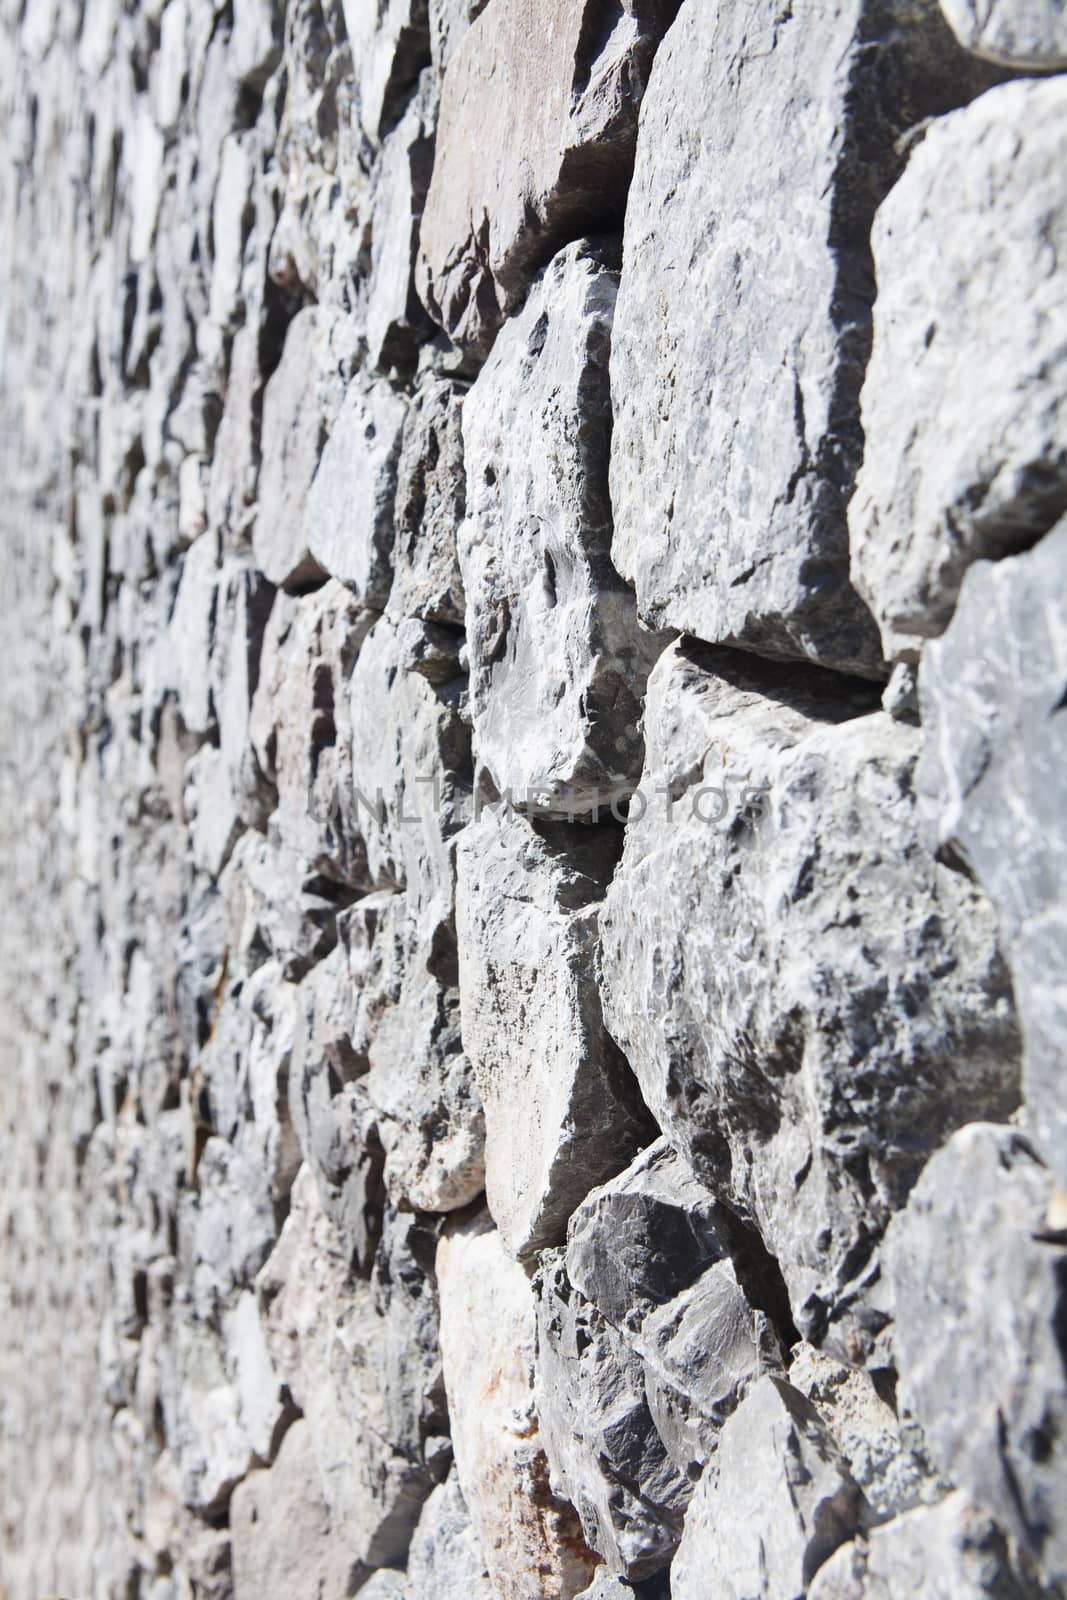 the Rock wall seamless texture